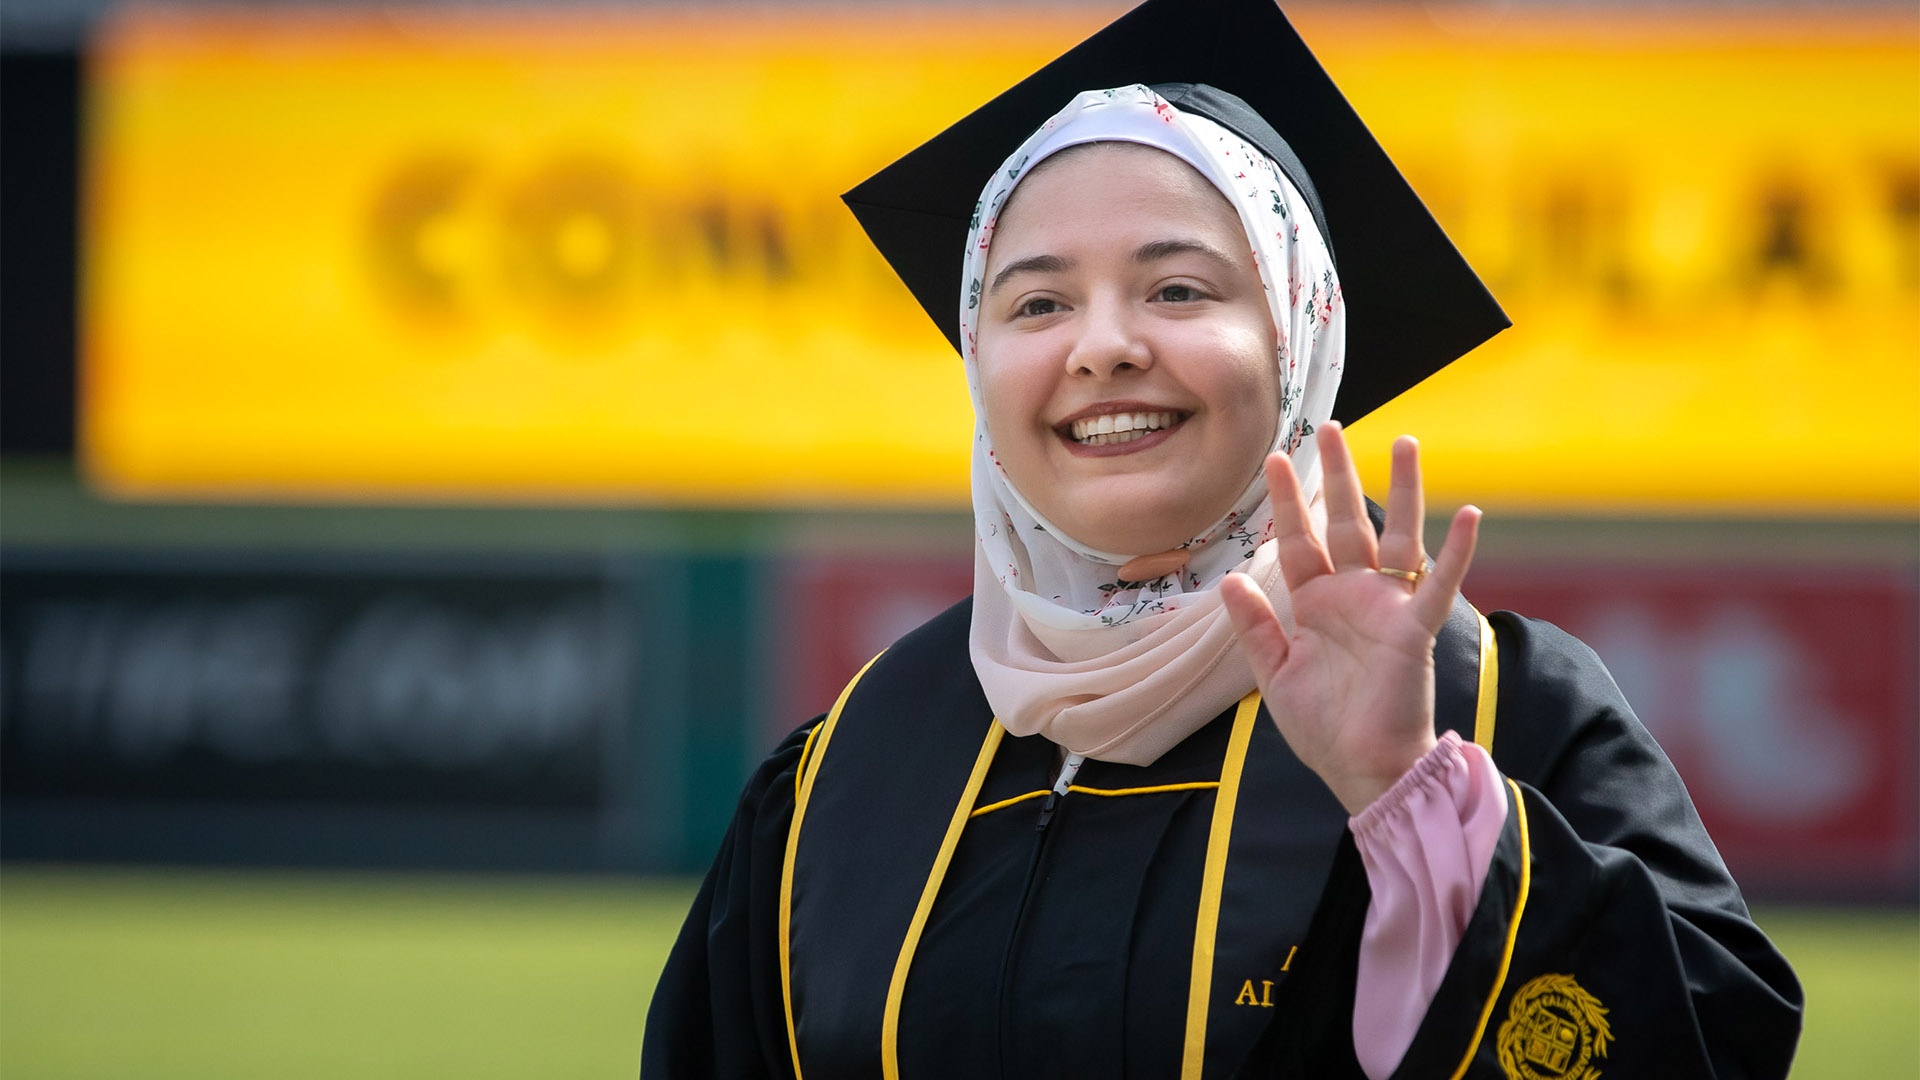 Female graduate wearing a hijab waves to the Commencement cr